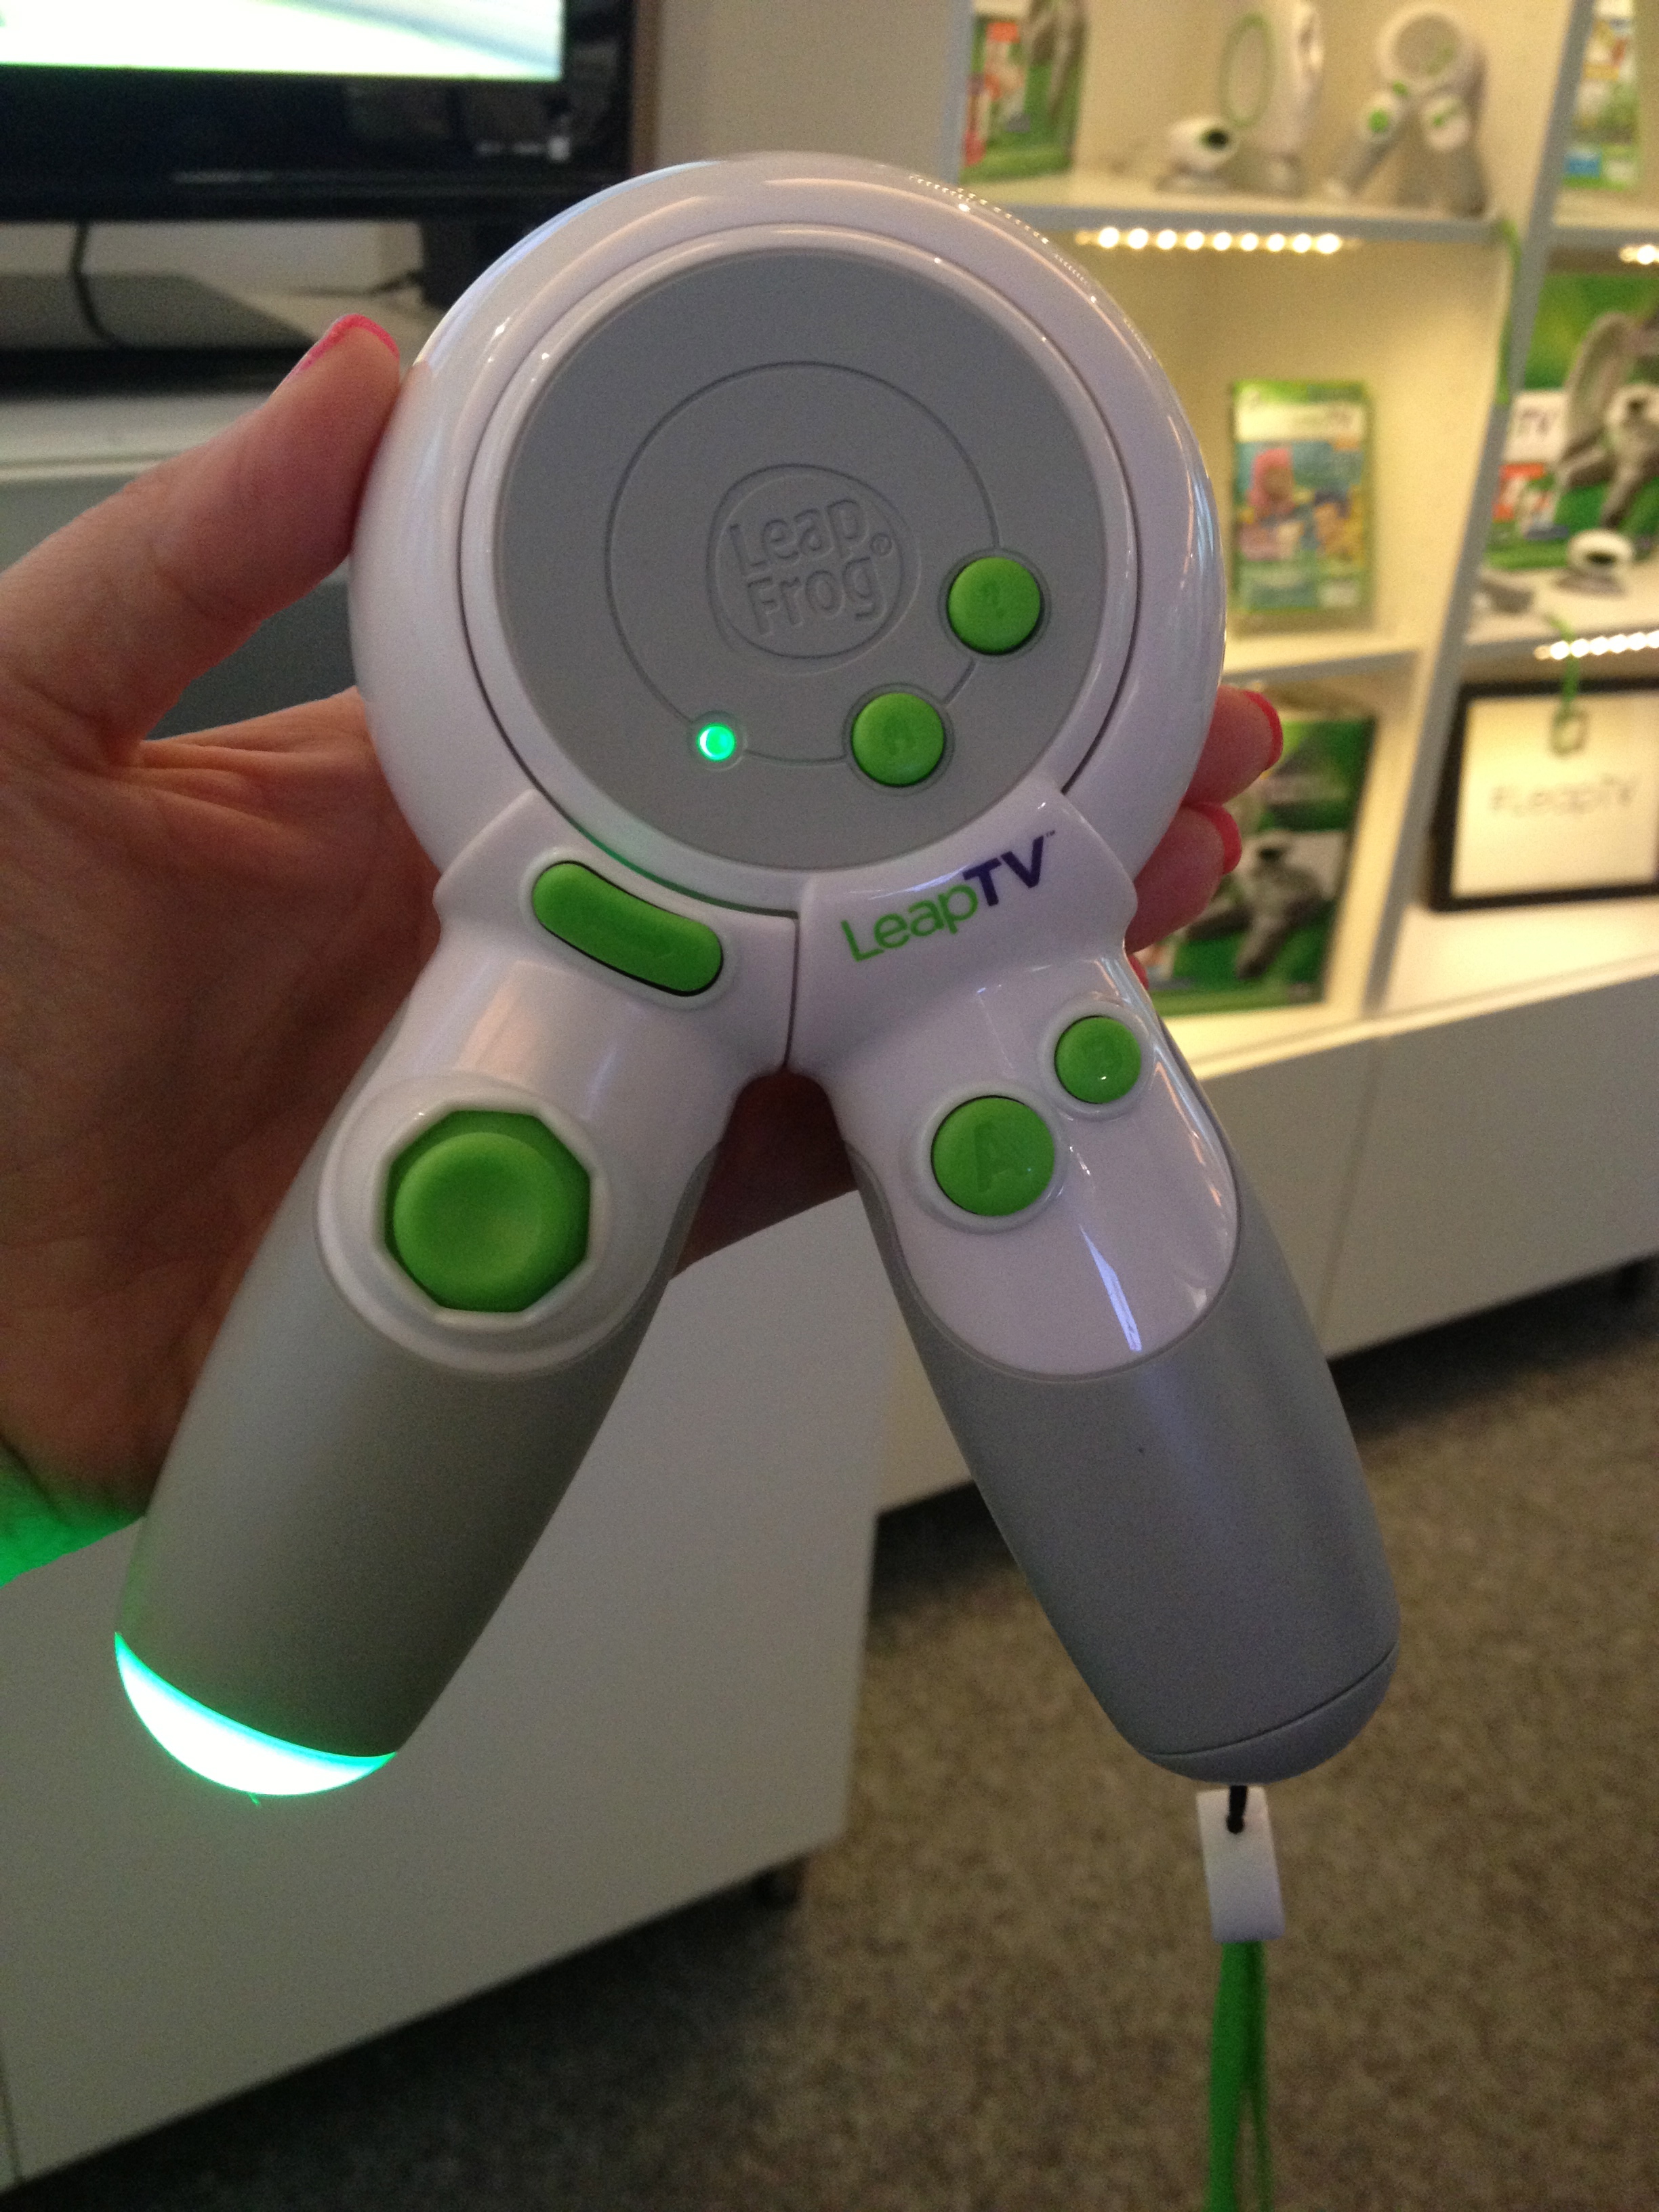 This innovative controller is perfect for little hands!